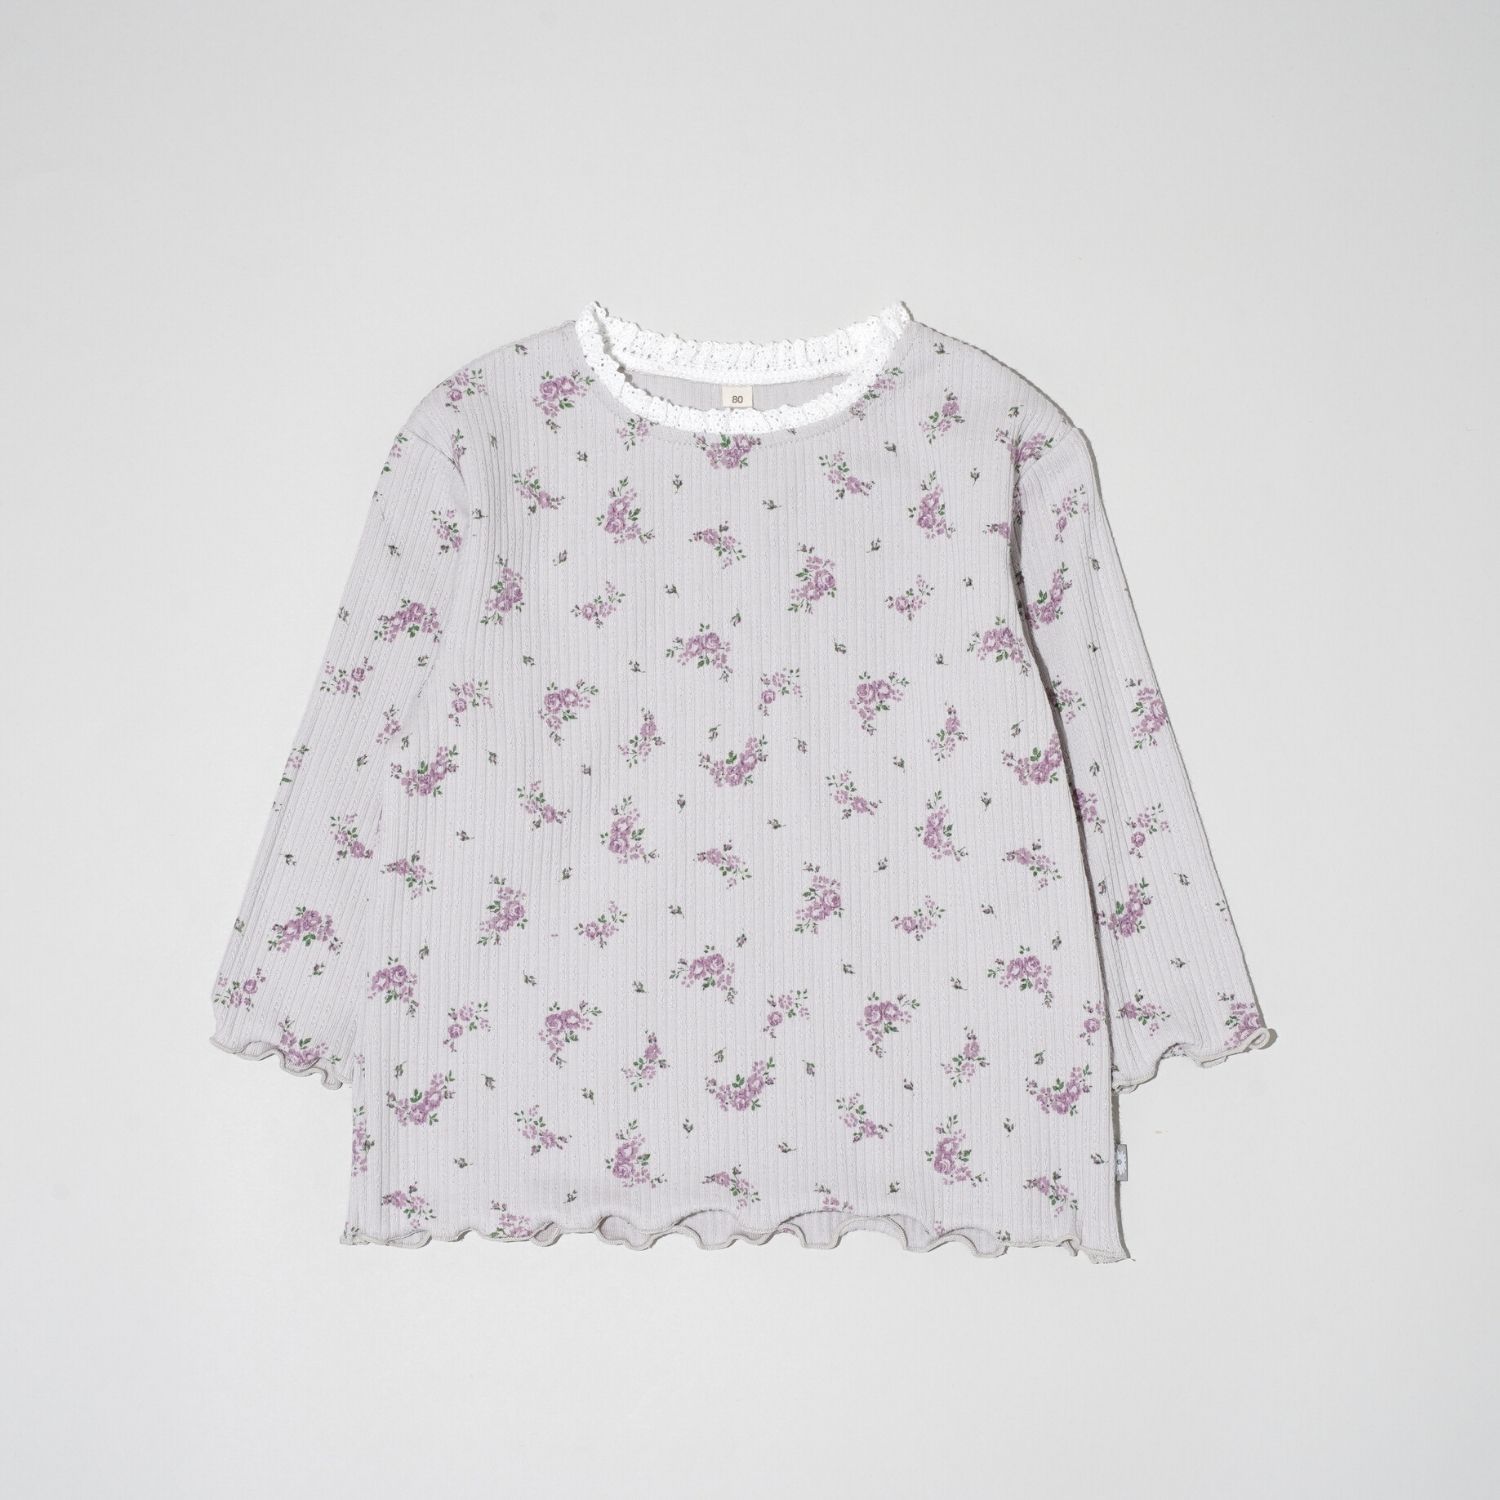 40%OFF！【Little's.t by's.t closet】フラワープリント長袖Tシャツ【子供服】